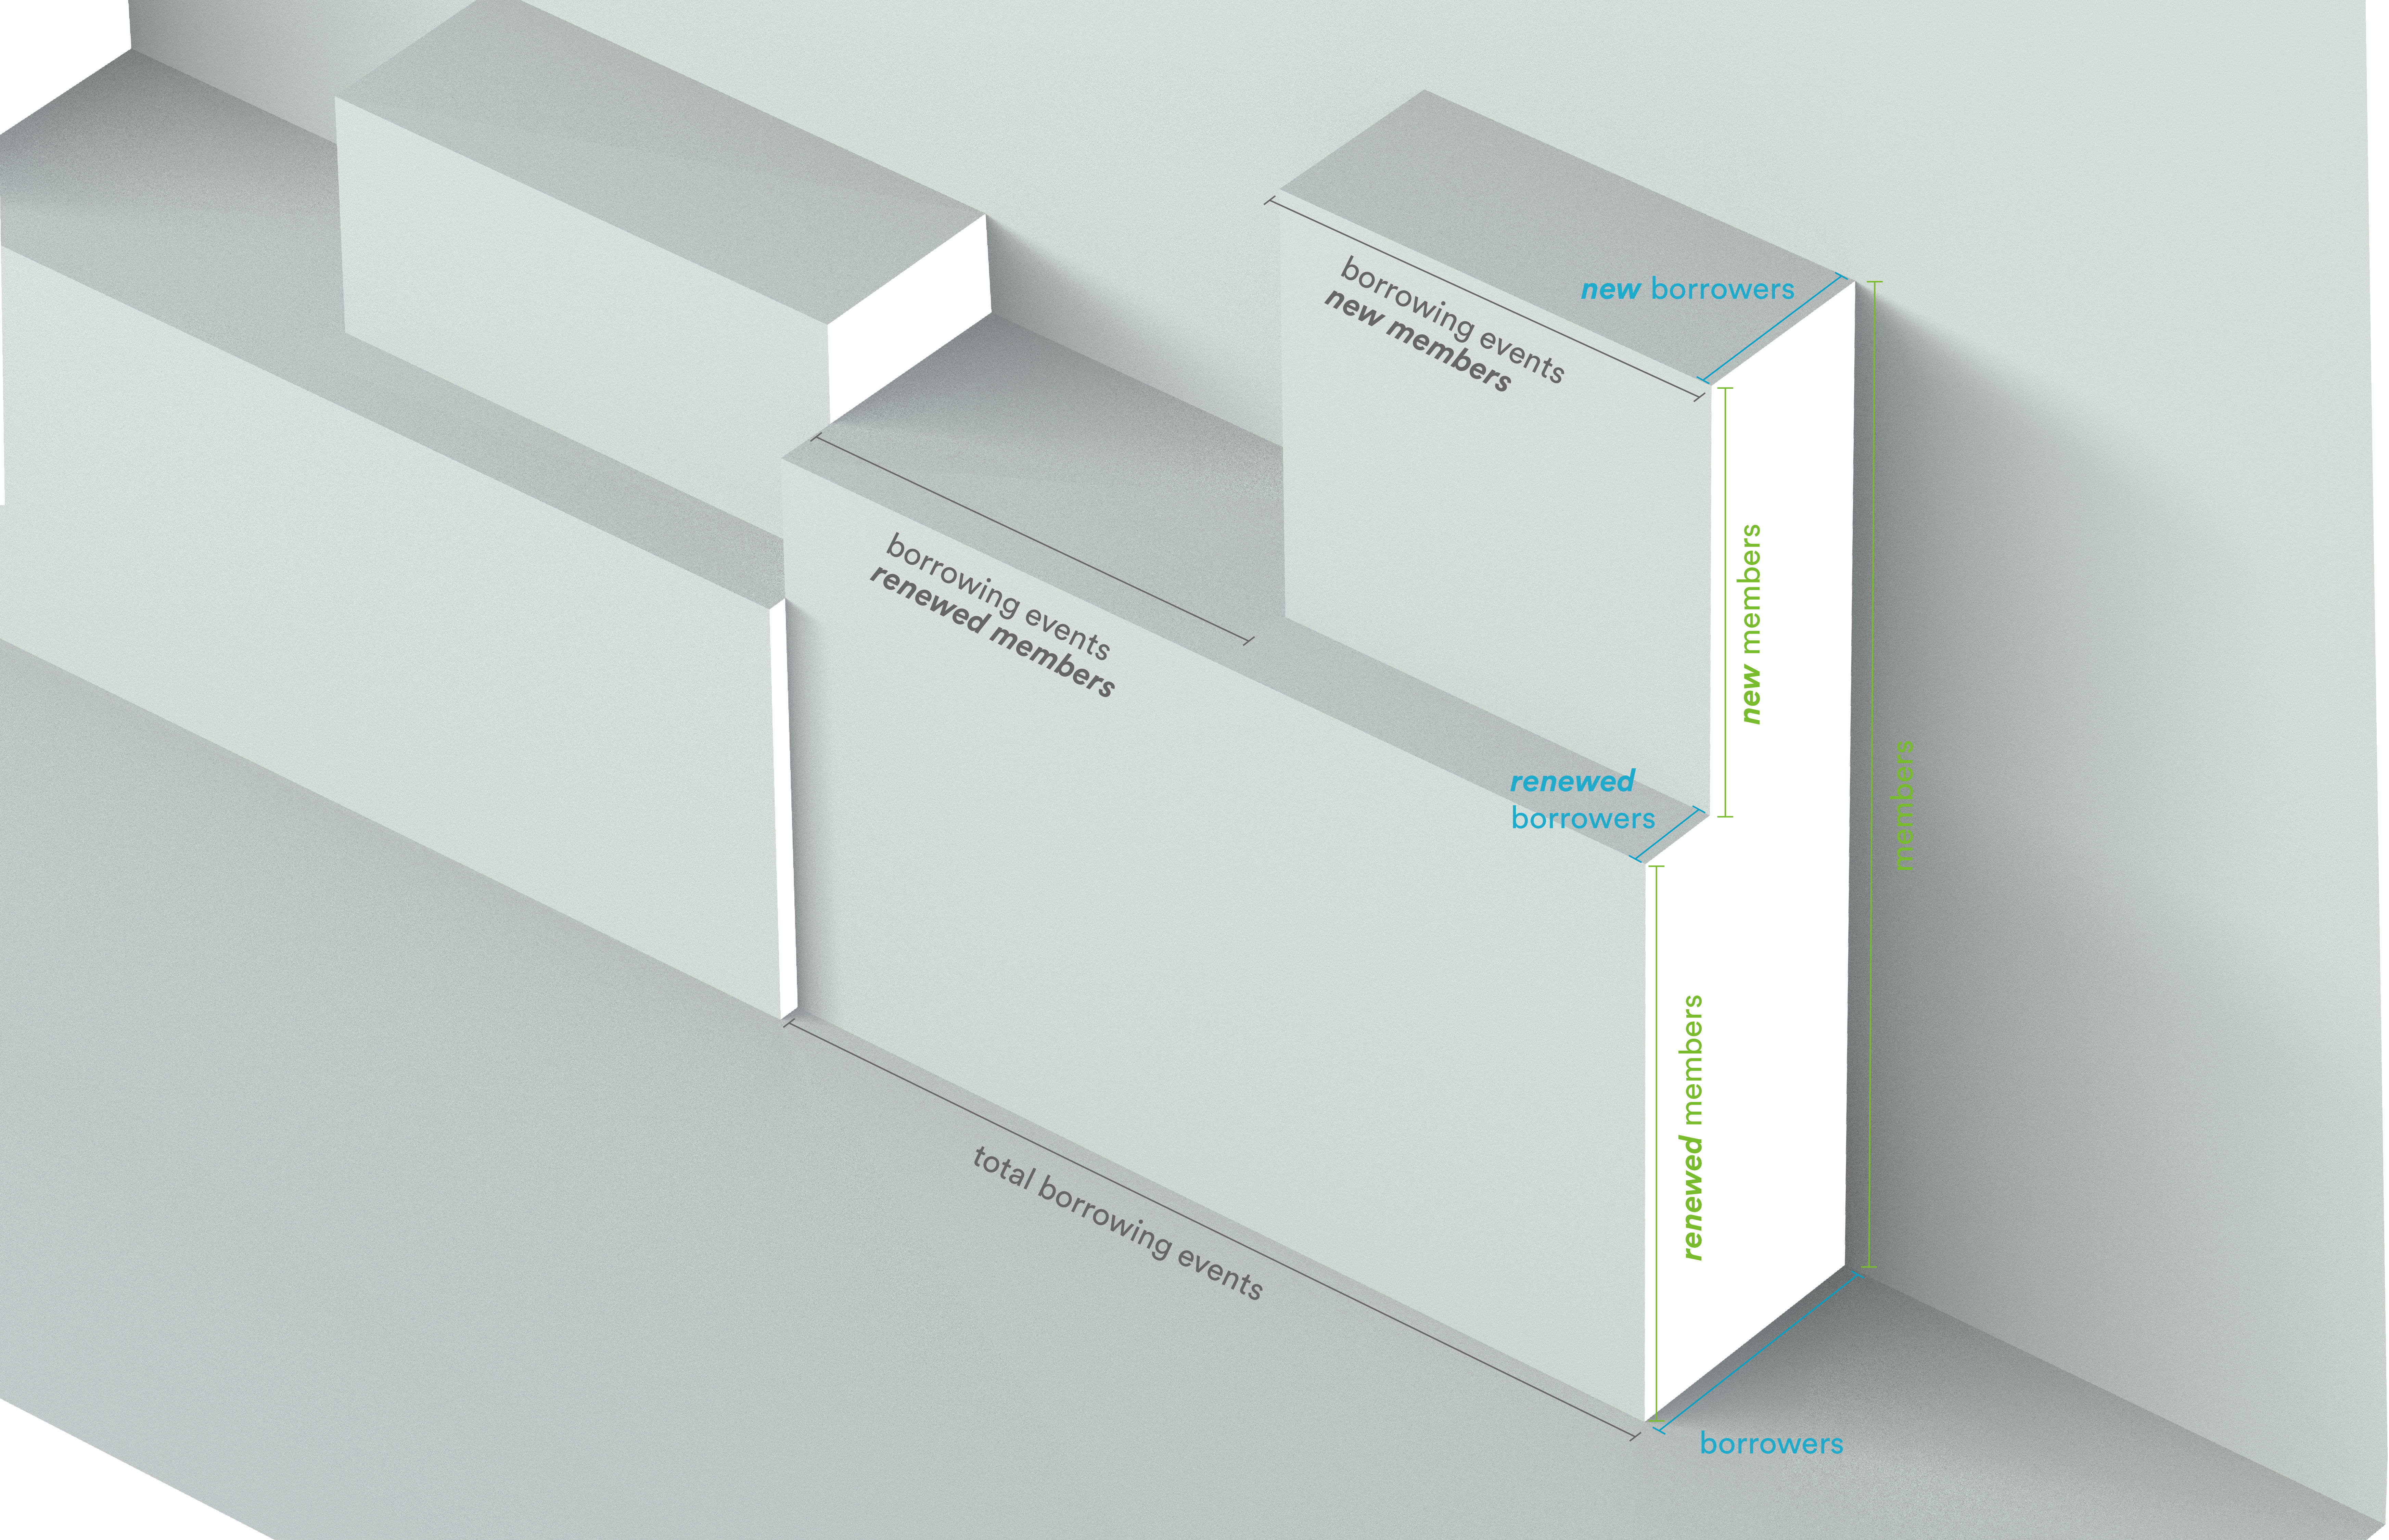 Textual labels overlaying a 3d rendering of a unit of the folded model along its three directions.